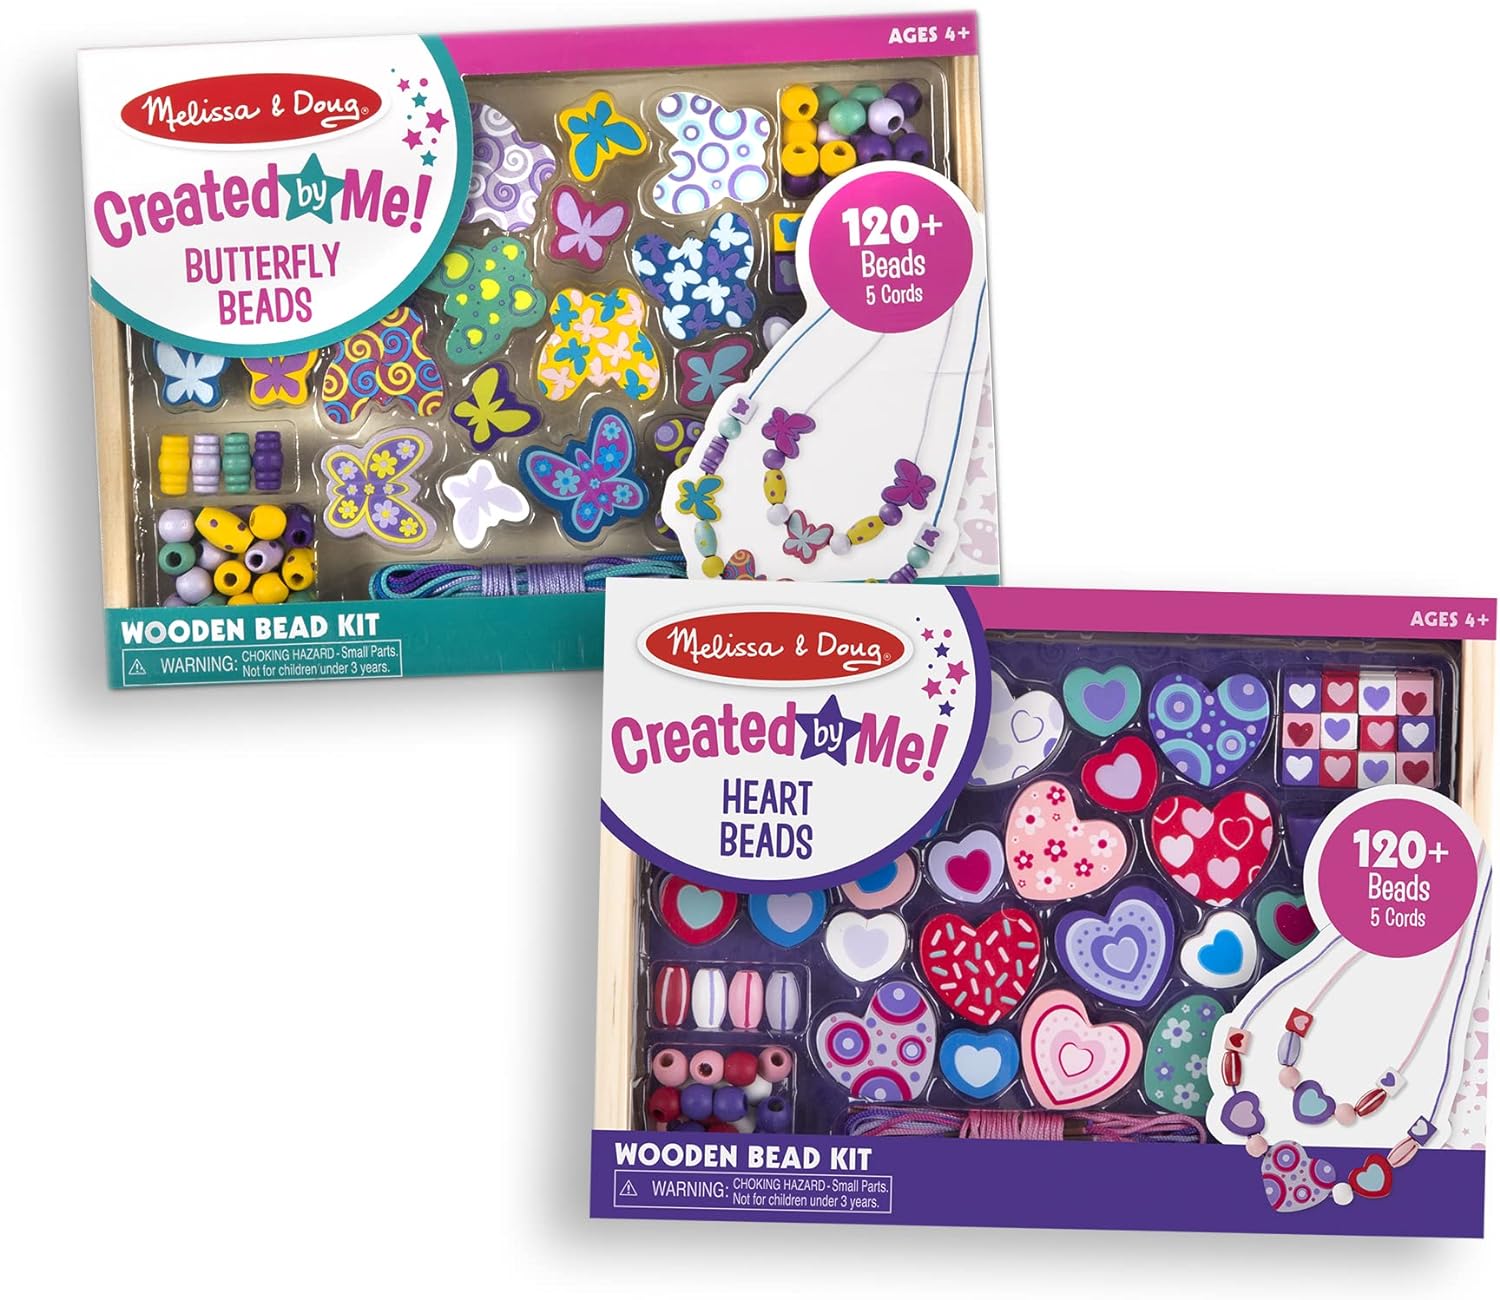 Limited-time deal: Melissa & Doug Sweet Hearts and Butterfly Friends Bead Set of 2 - 250+ Wooden Beads - $18.30